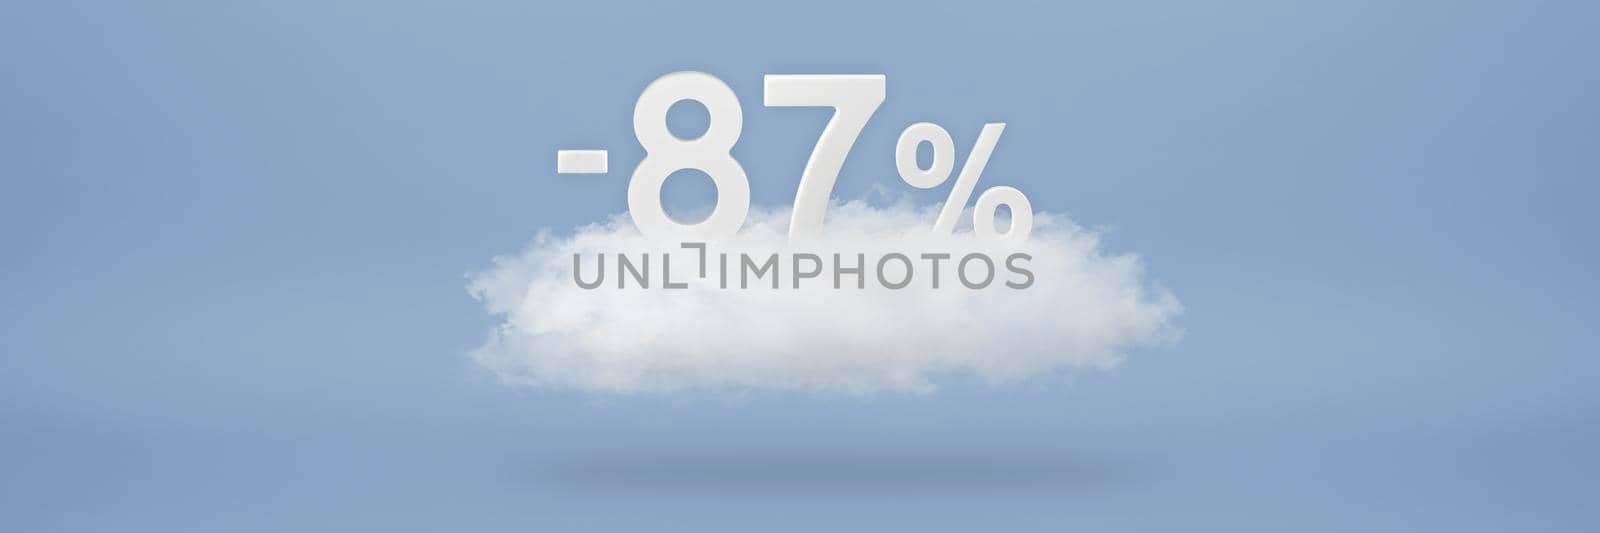 Discount 87 percent. Big discounts, sale up to eighty seven percent. 3D numbers float on a cloud on a blue background. Copy space. Advertising banner and poster to be inserted into the project by SERSOL